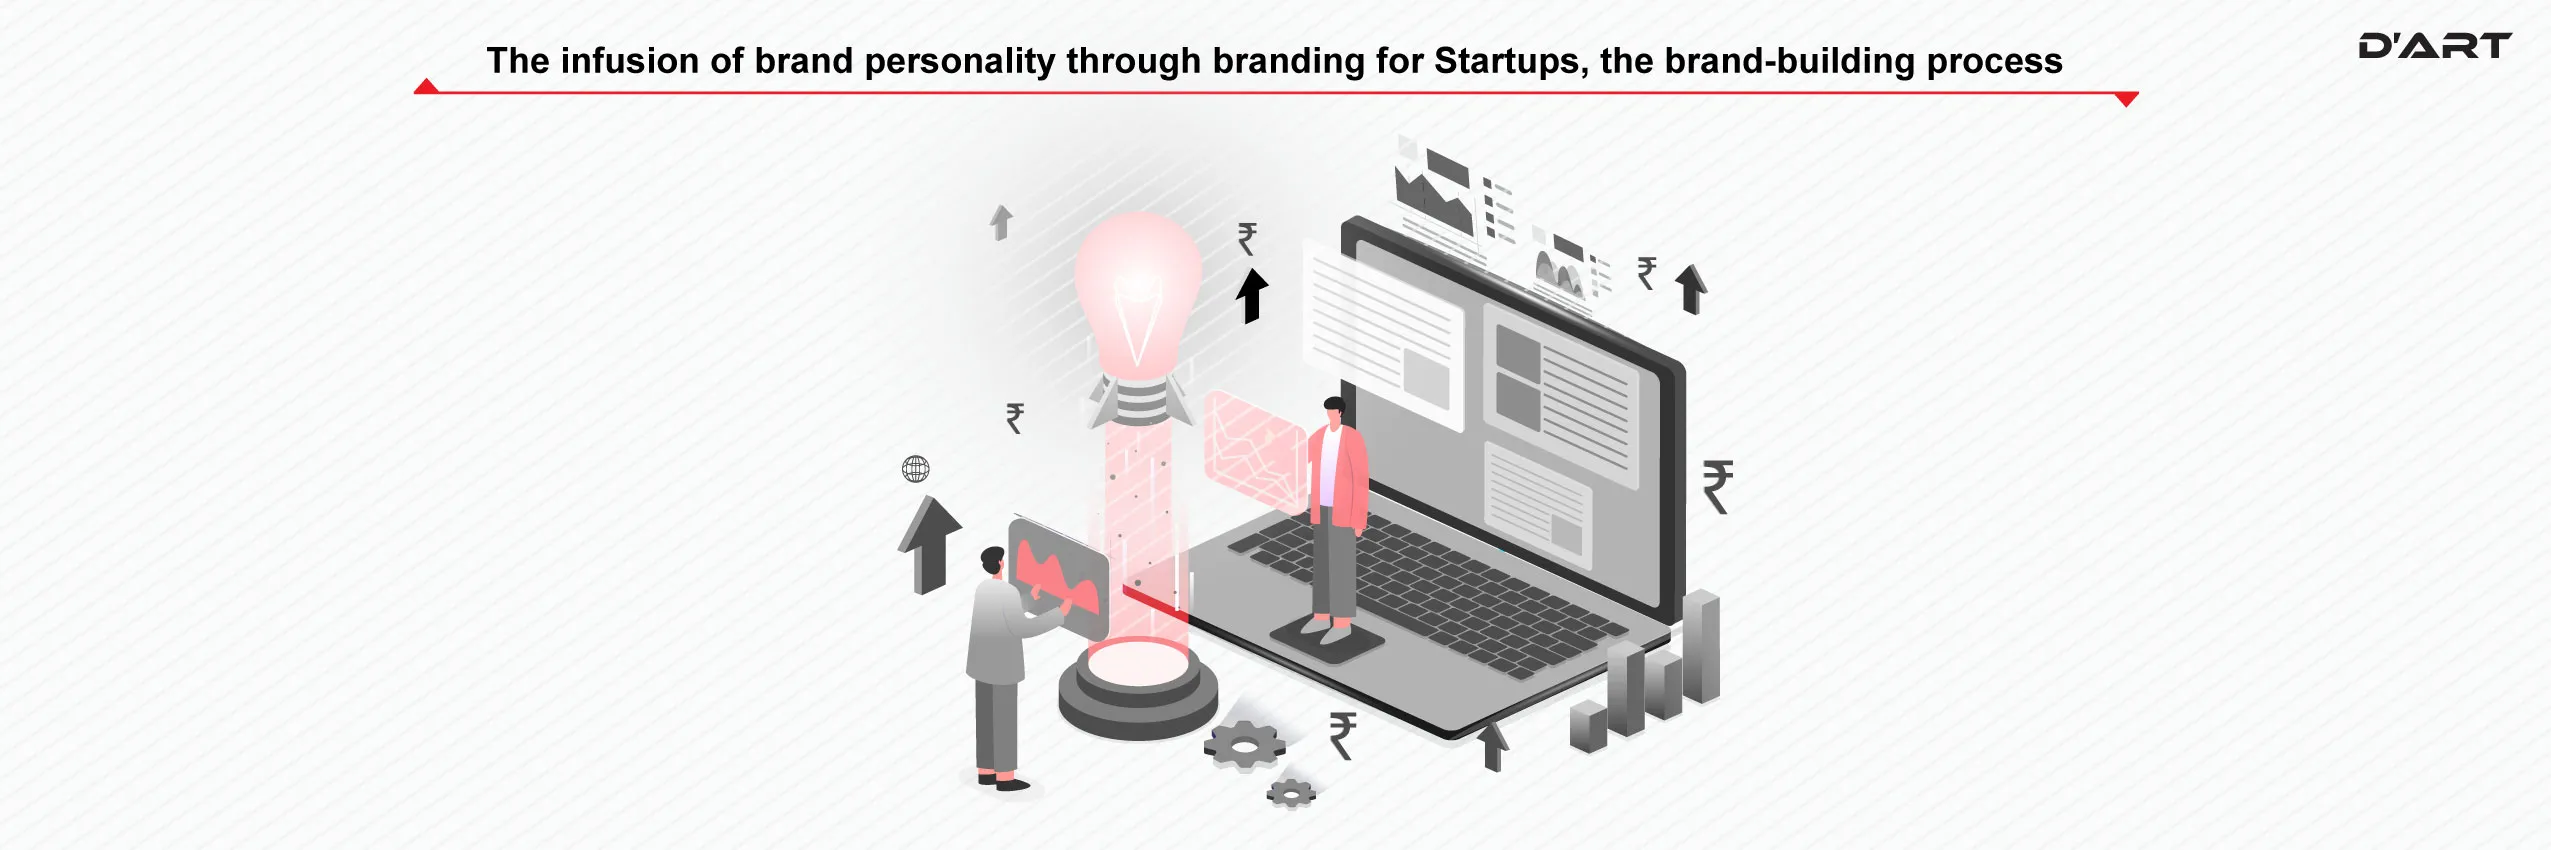 The infusion of brand personality through branding for startups, the brand-building process